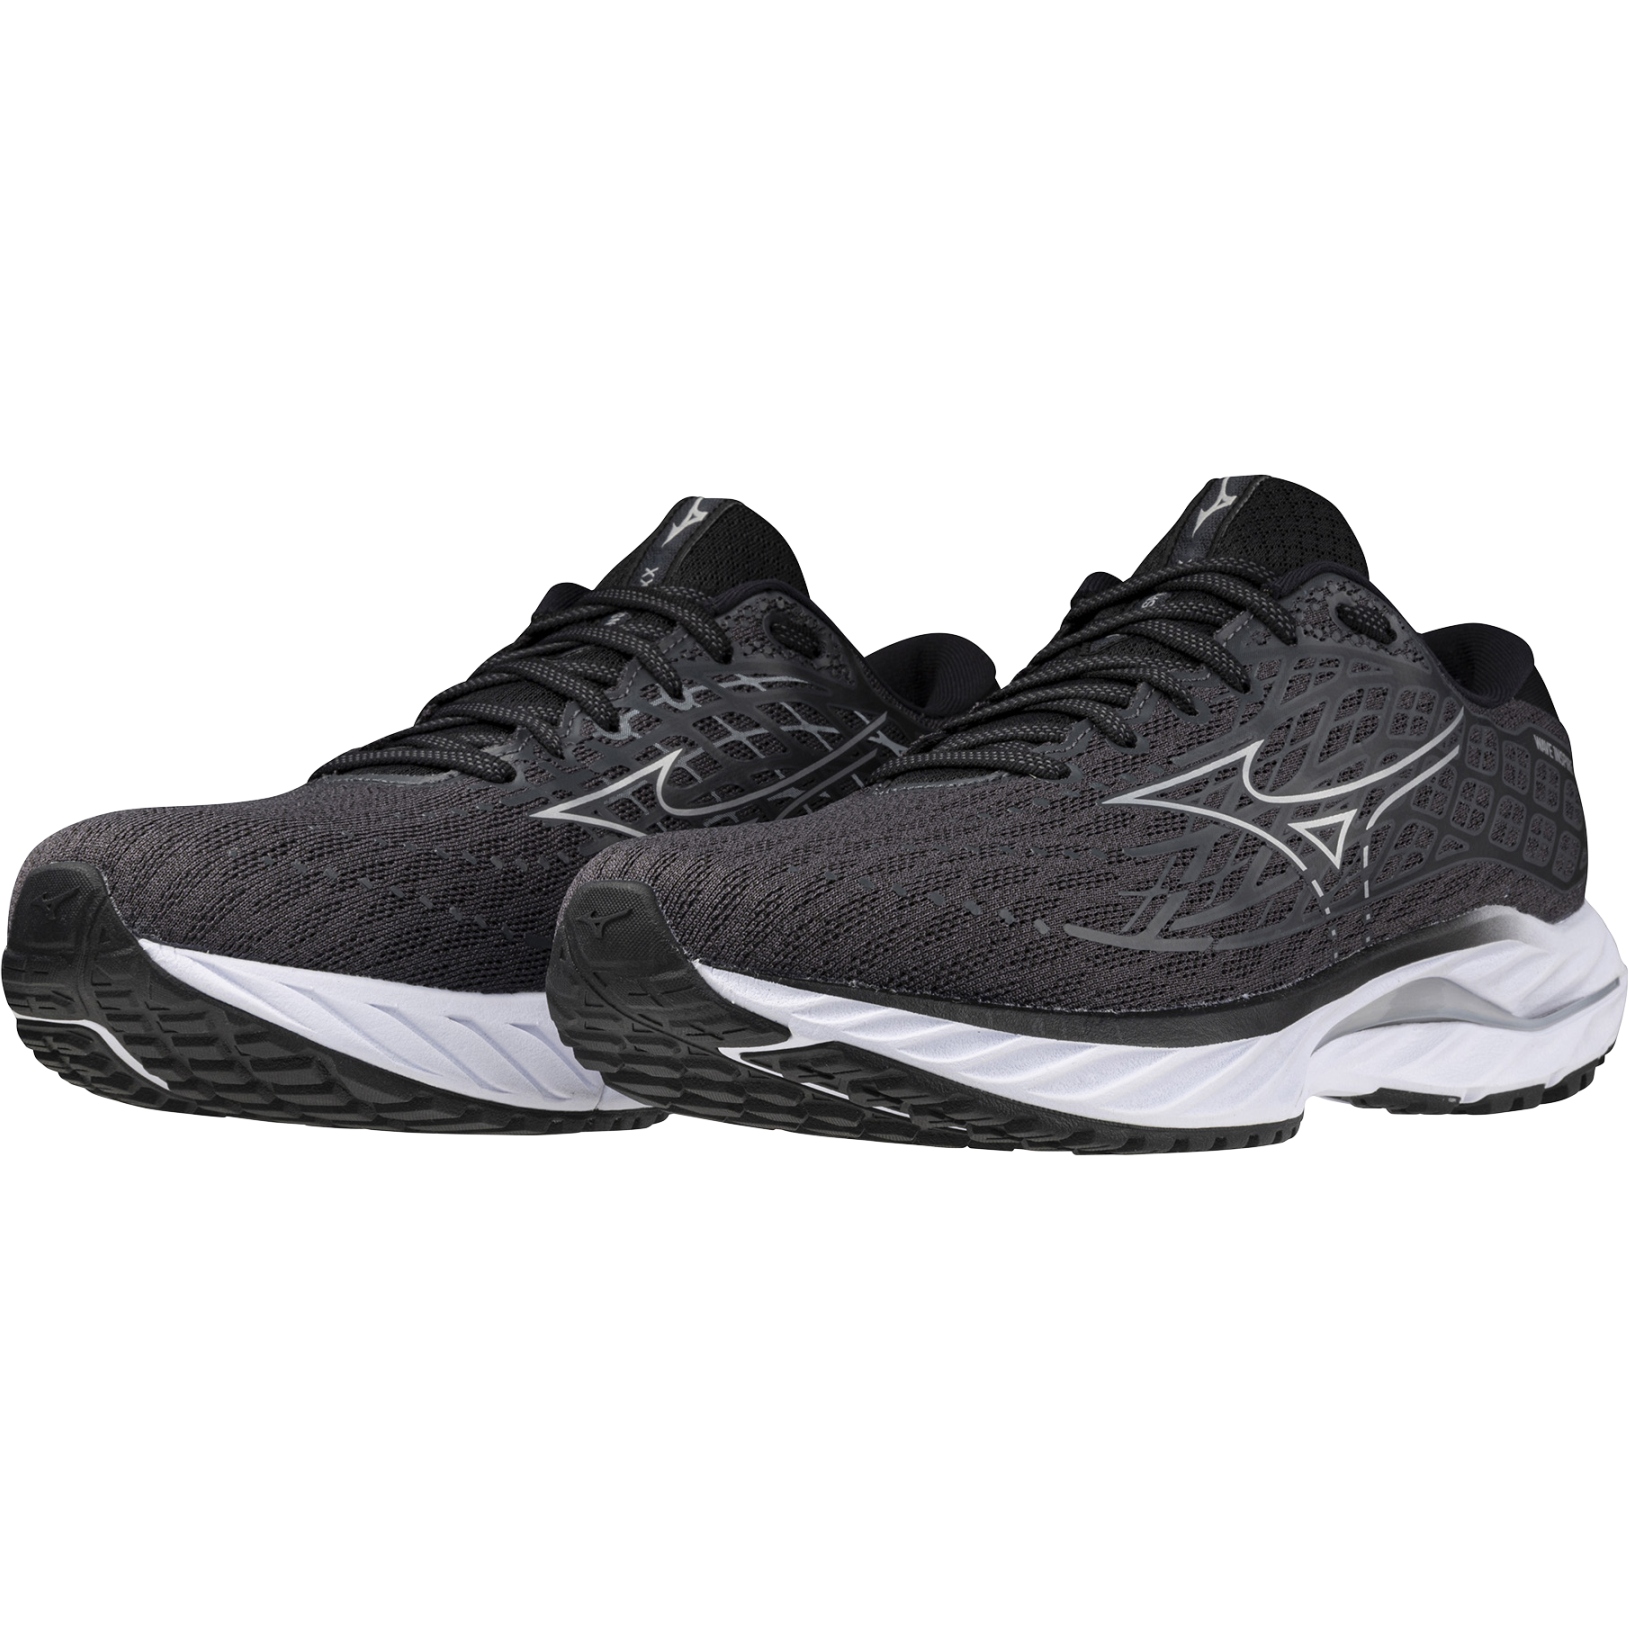 Picture of Mizuno Wave Inspire 20 Wide Running Shoes Men - Ebony / White / Black